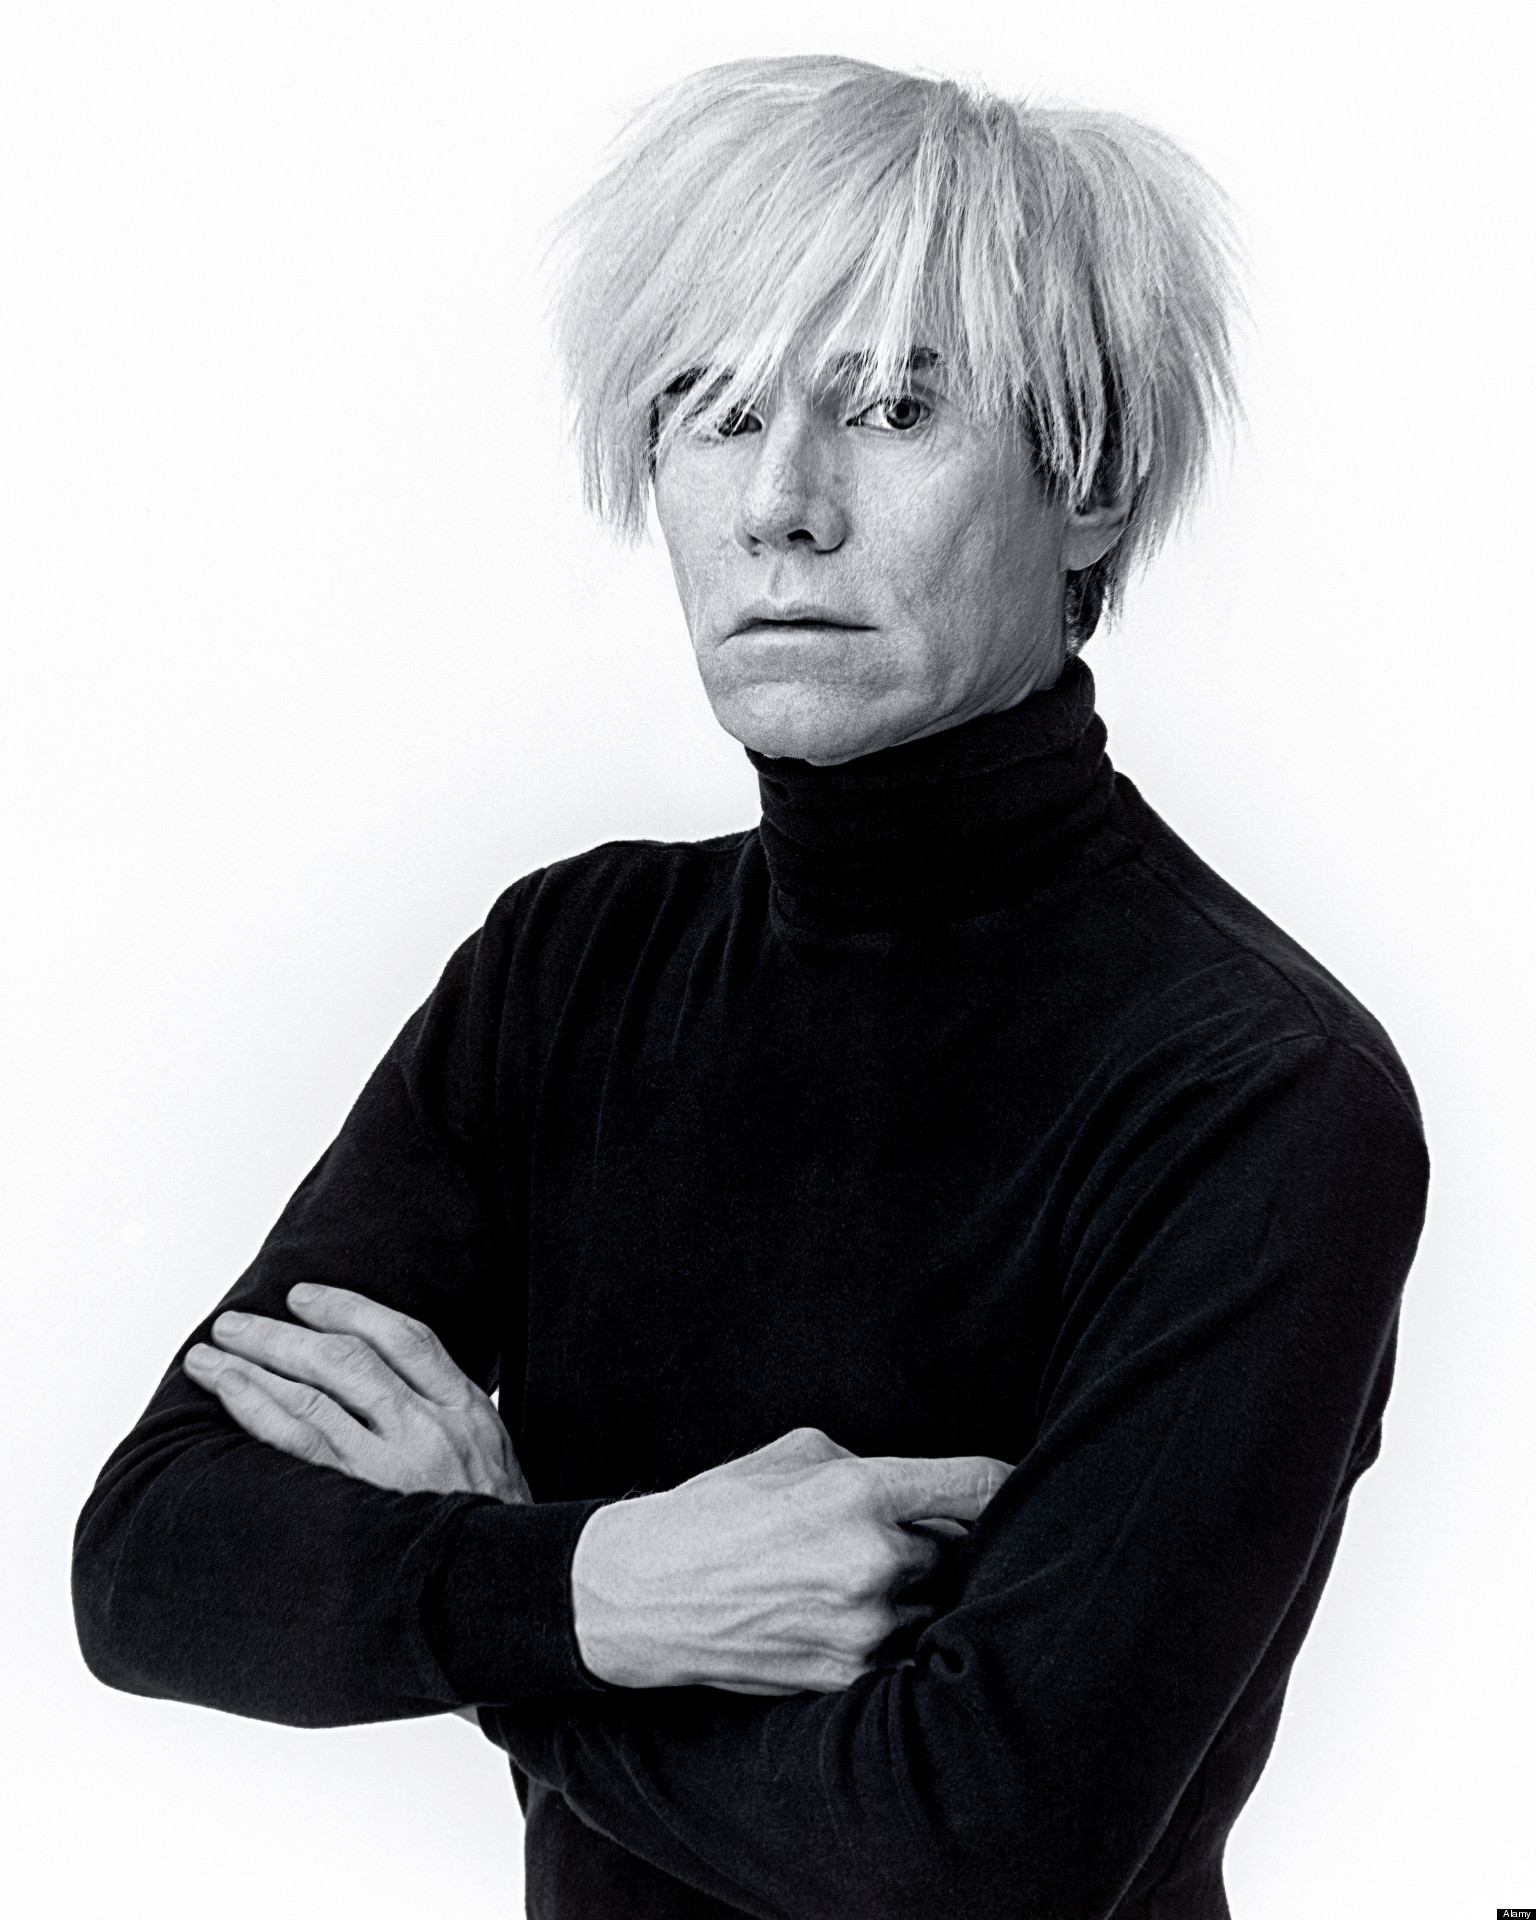 Andy Warhol is an iconic American artist who transformed our understanding of mass production and iconography